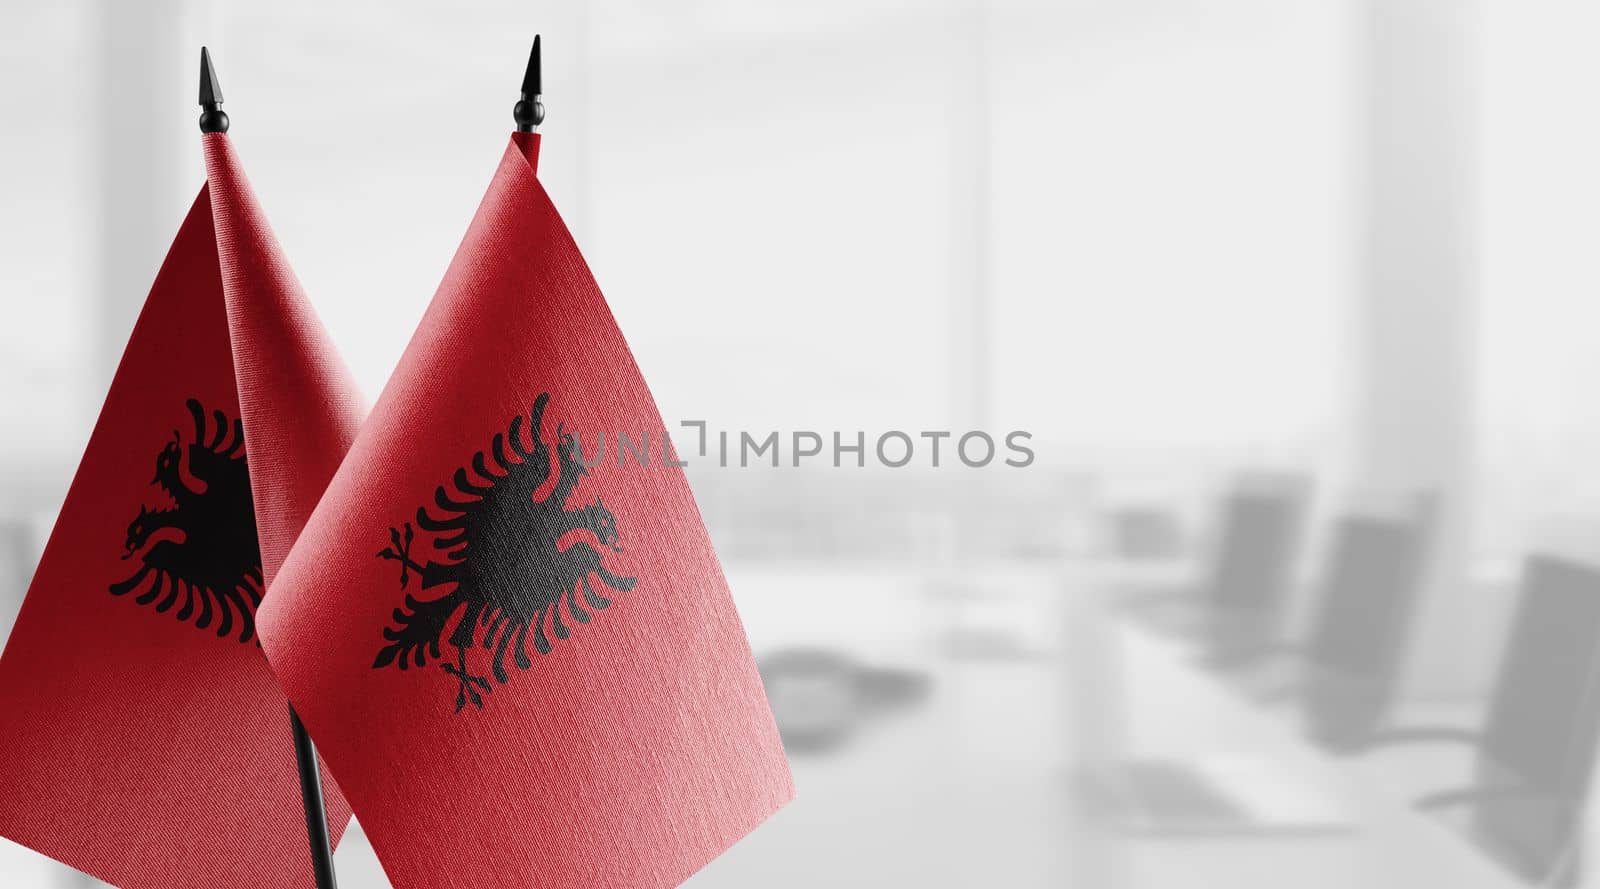 A small Albania flag on an abstract blurry background.